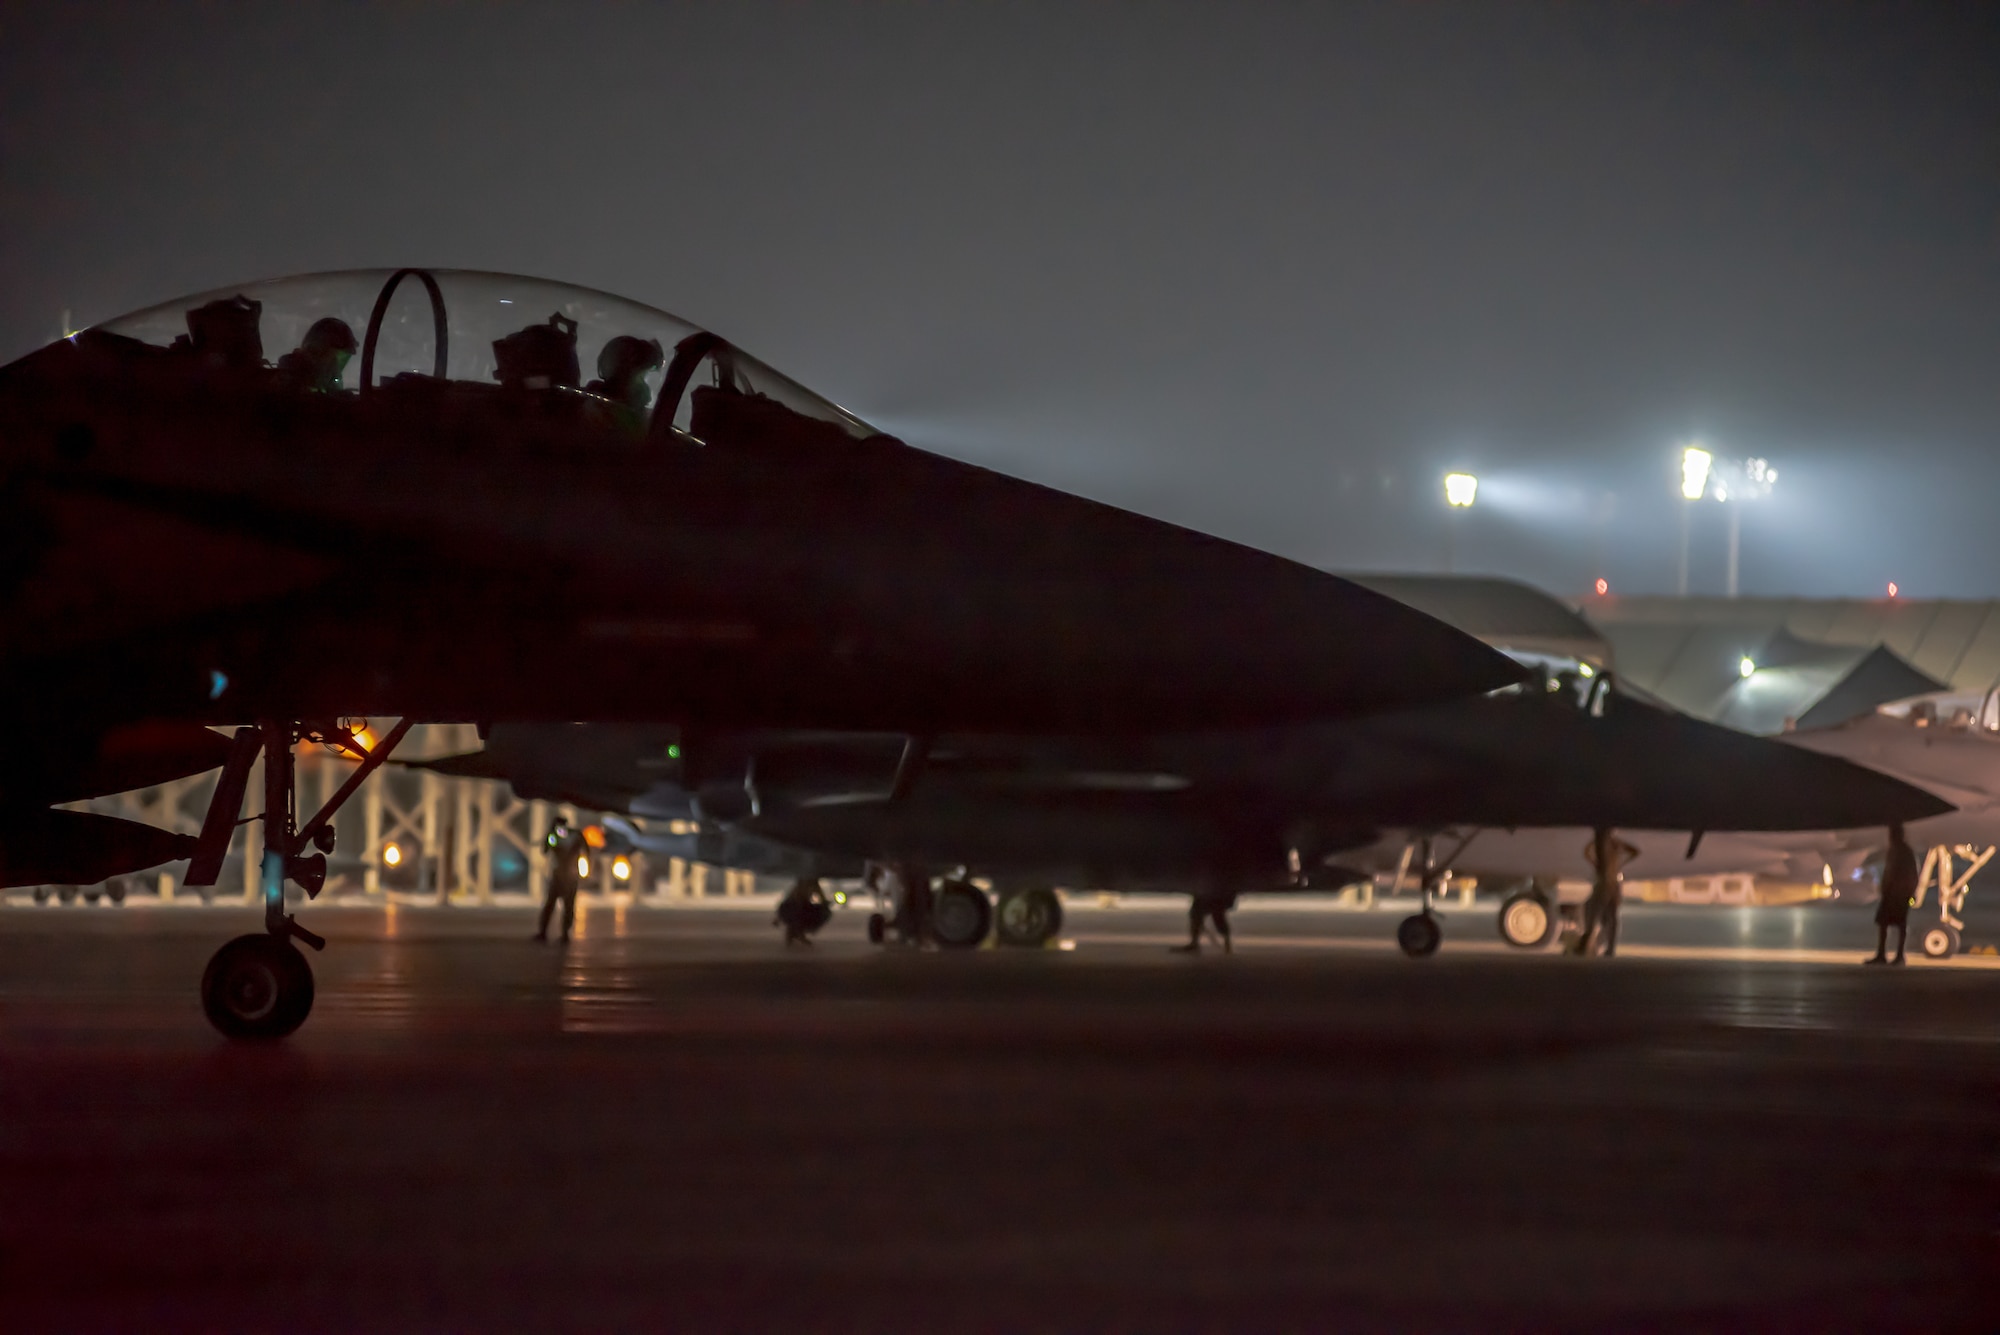 An F-15E Strike Eagles prepares to taxi the runway for takeoff from Al Dhafra Air Base, United Arab Emirates, Sept. 10, 2019. The F-15E conducted a Coalition and Iraqi Counter-Terrorism Service air strike in the Salah ad Din Province, Iraq, Sept. 10, in support of Iraqi ground force clearing operations.  (U.S. Air Force Photo by Staff Sgt. Chris Thornbury)